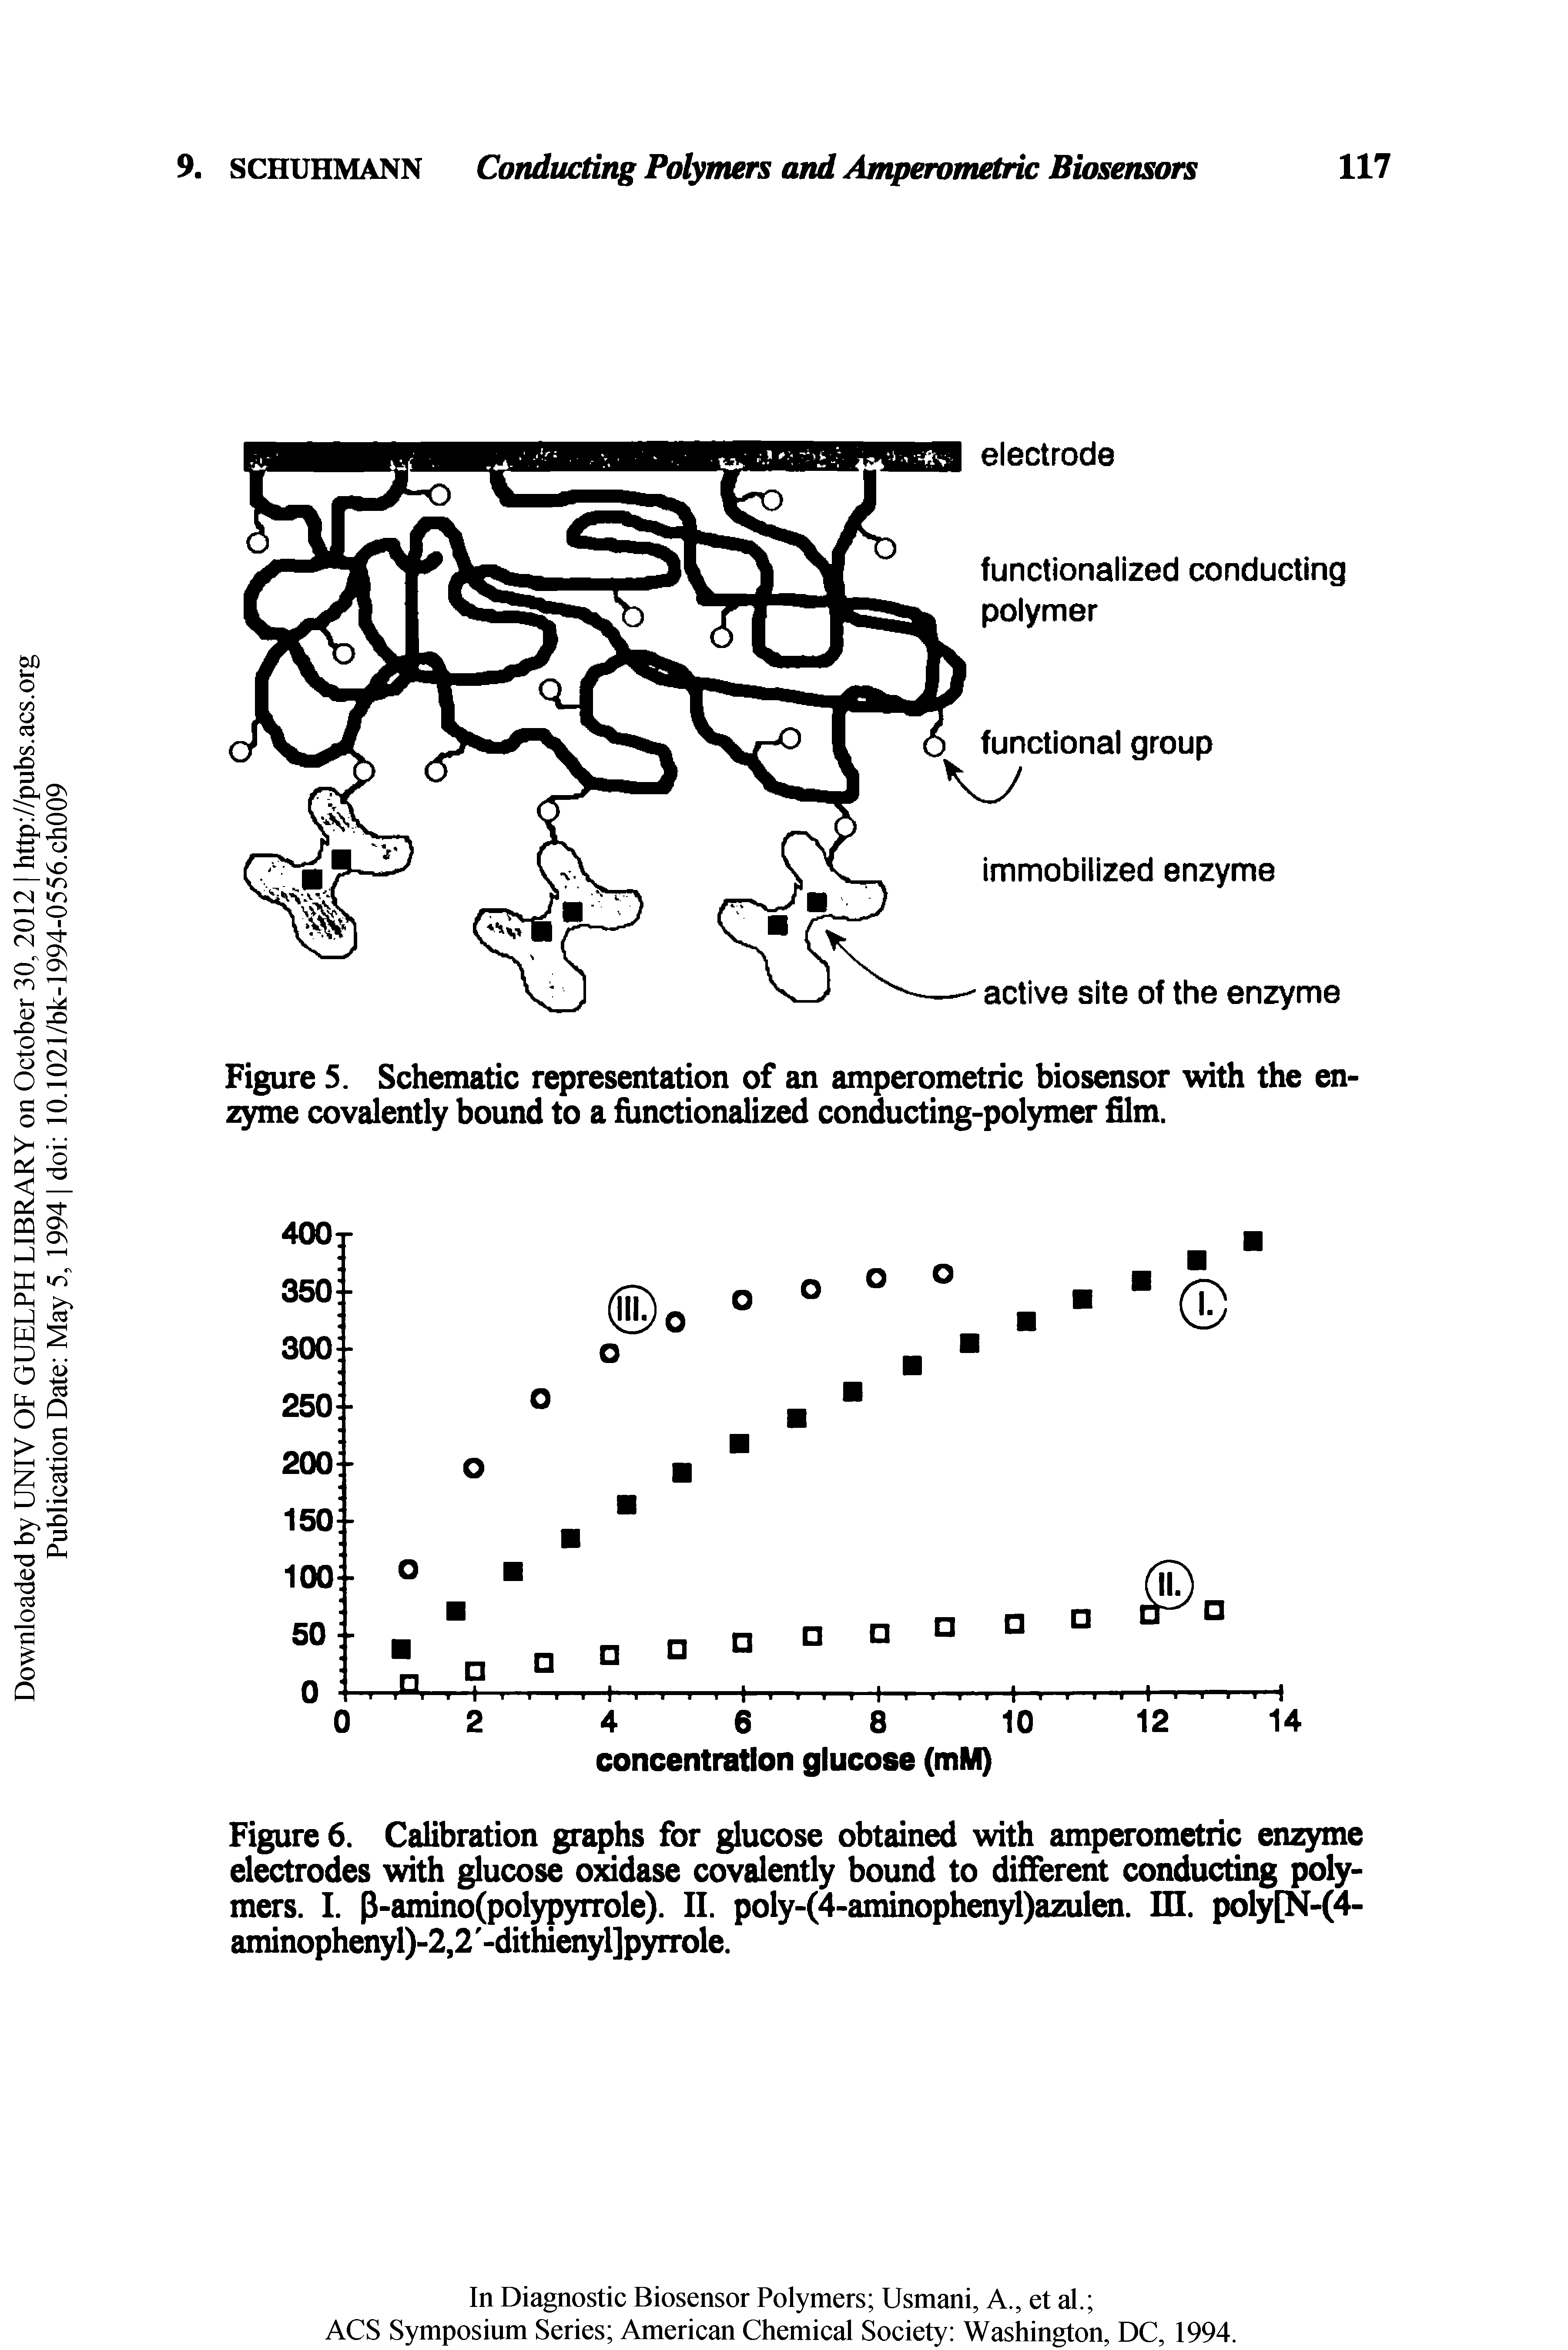 Figure 6. Calibration graphs for glucose obtained with amperometric enzyme electrodes with glucose oxidase covalently bound to different conducting polymers. I. P-amino(polypyrrole). II. poly-(4-aminophenyl)azulen. HI. poly[N-(4-aminophenyl)-2,2 -dithienyl]pyrrole.